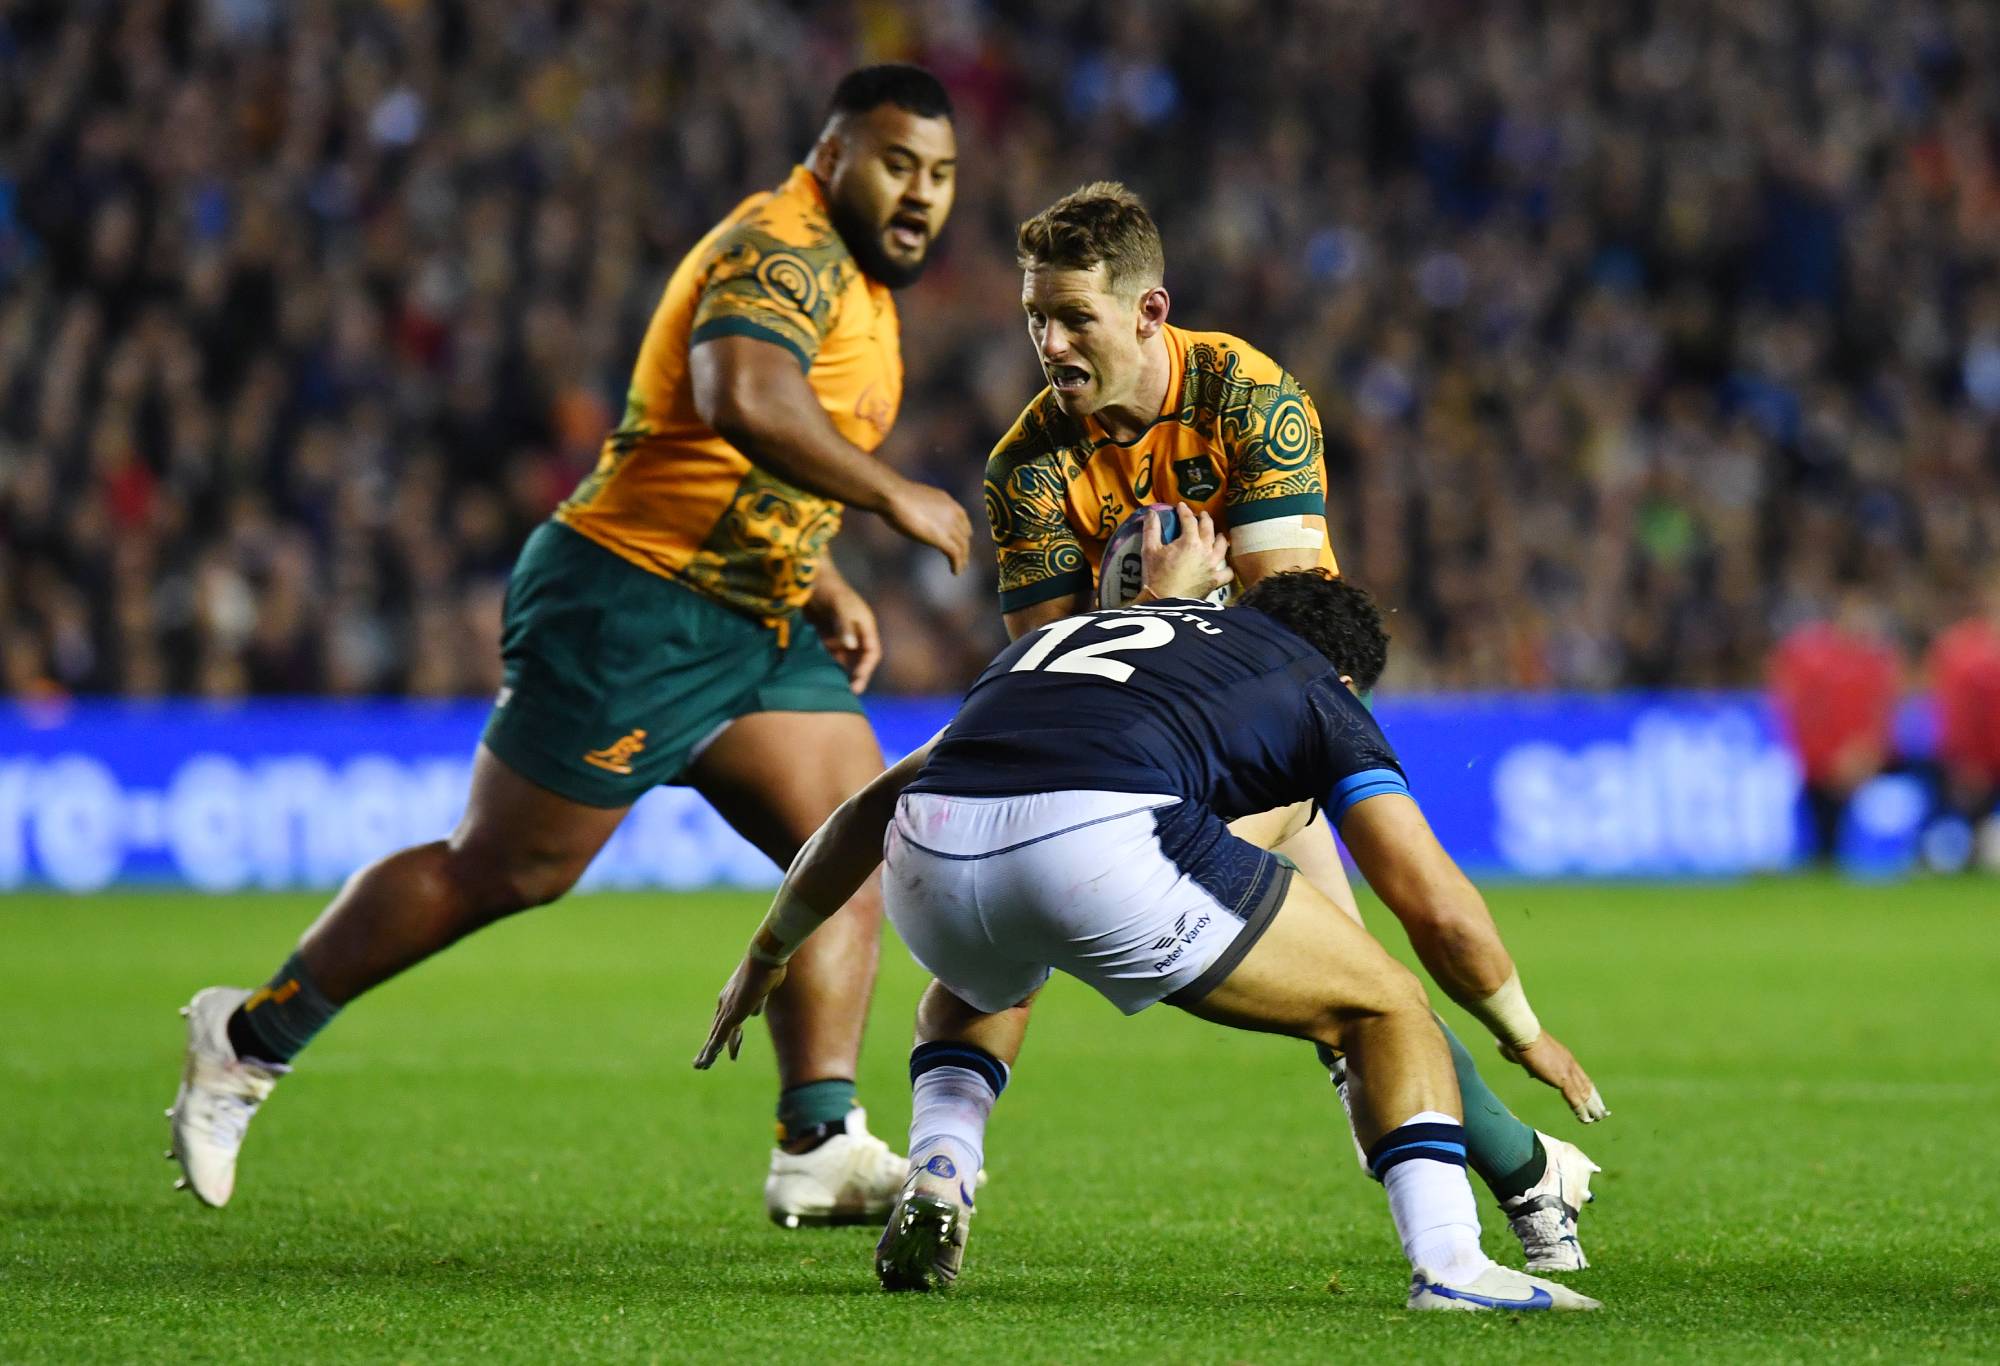 Bernard Foley of Australia is challenged by Sione Tuipulotu of Scotland during the Autumn International match between Scotland and Australia at Murrayfield Stadium on October 29, 2022 in Edinburgh, Scotland. (Photo by Mark Runnacles/Getty Images)